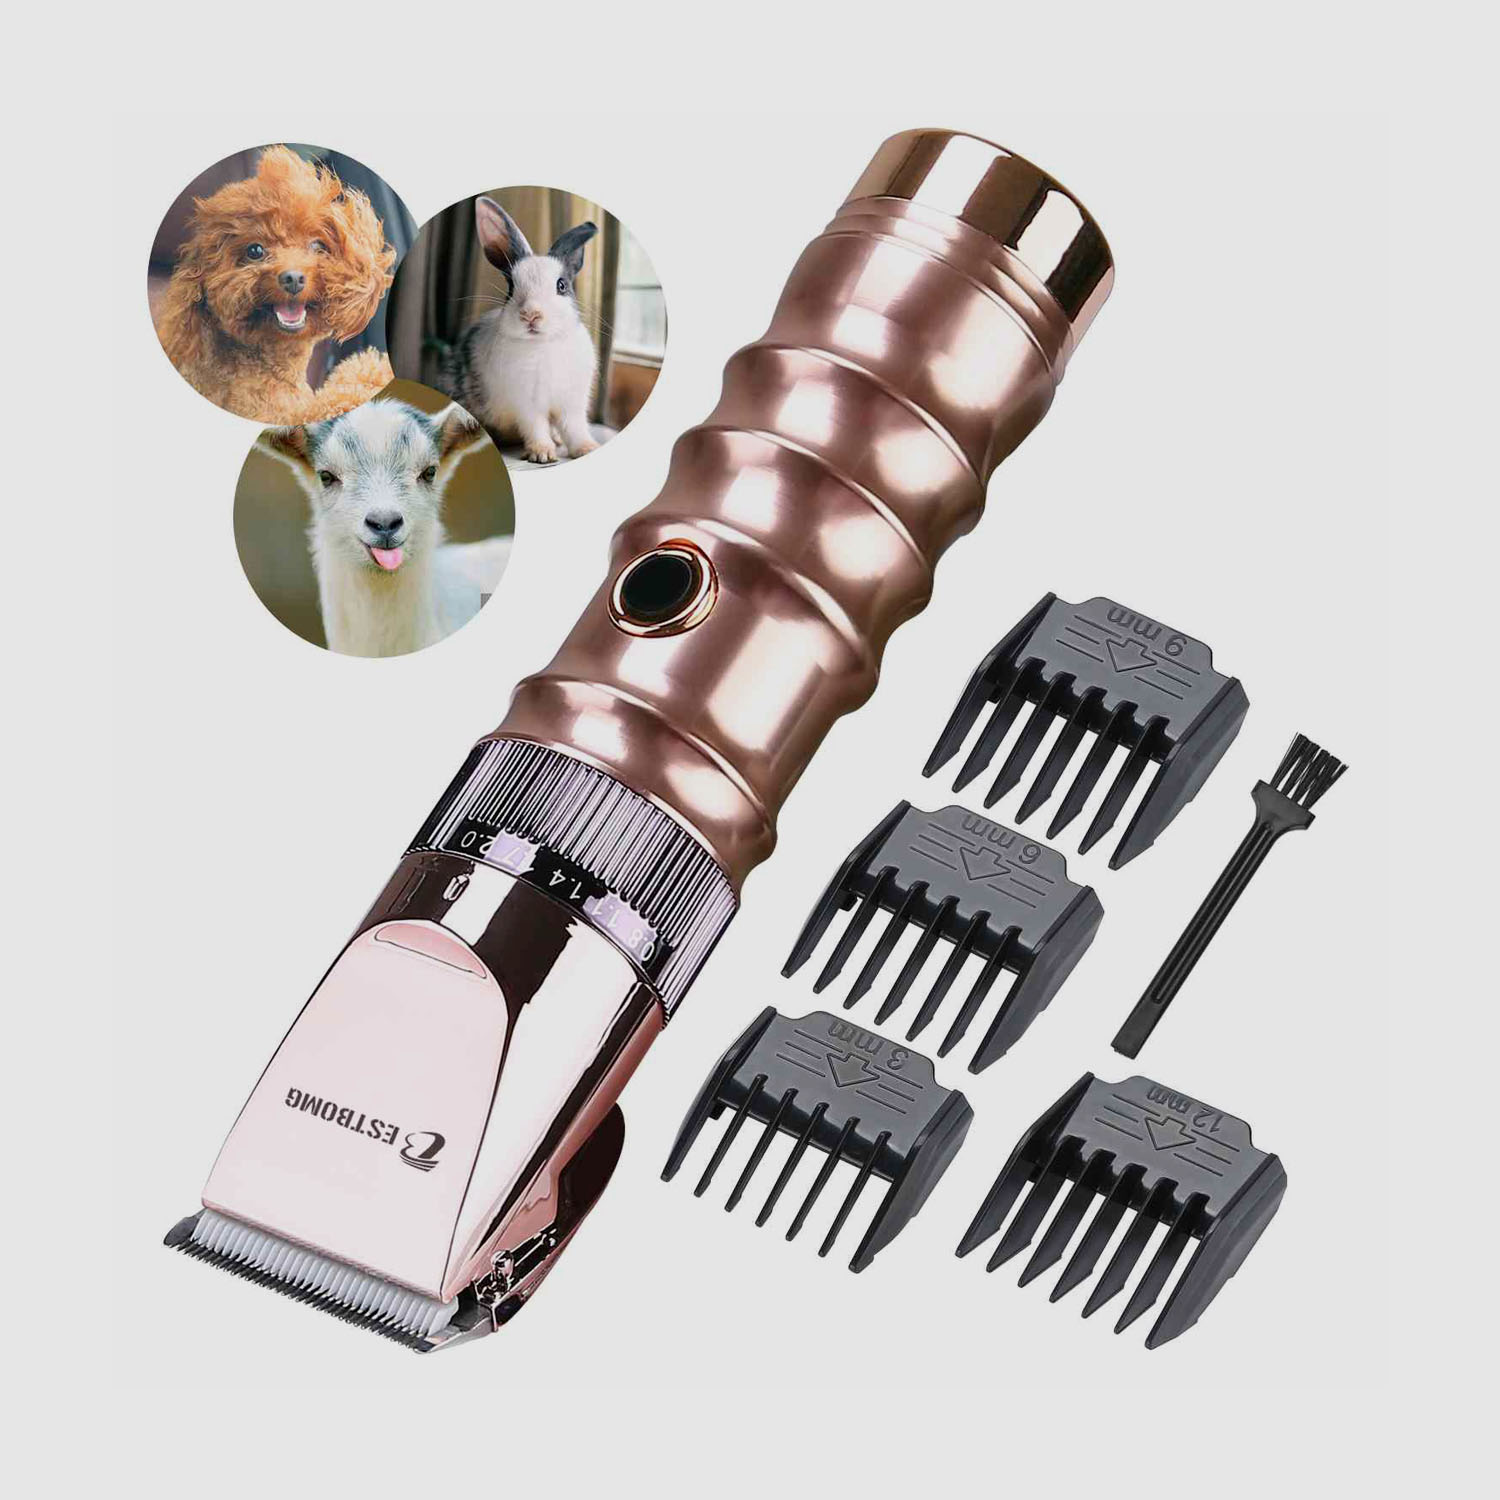 Pro Series Rechargeable Cor Clipper Grooming Ornamentum